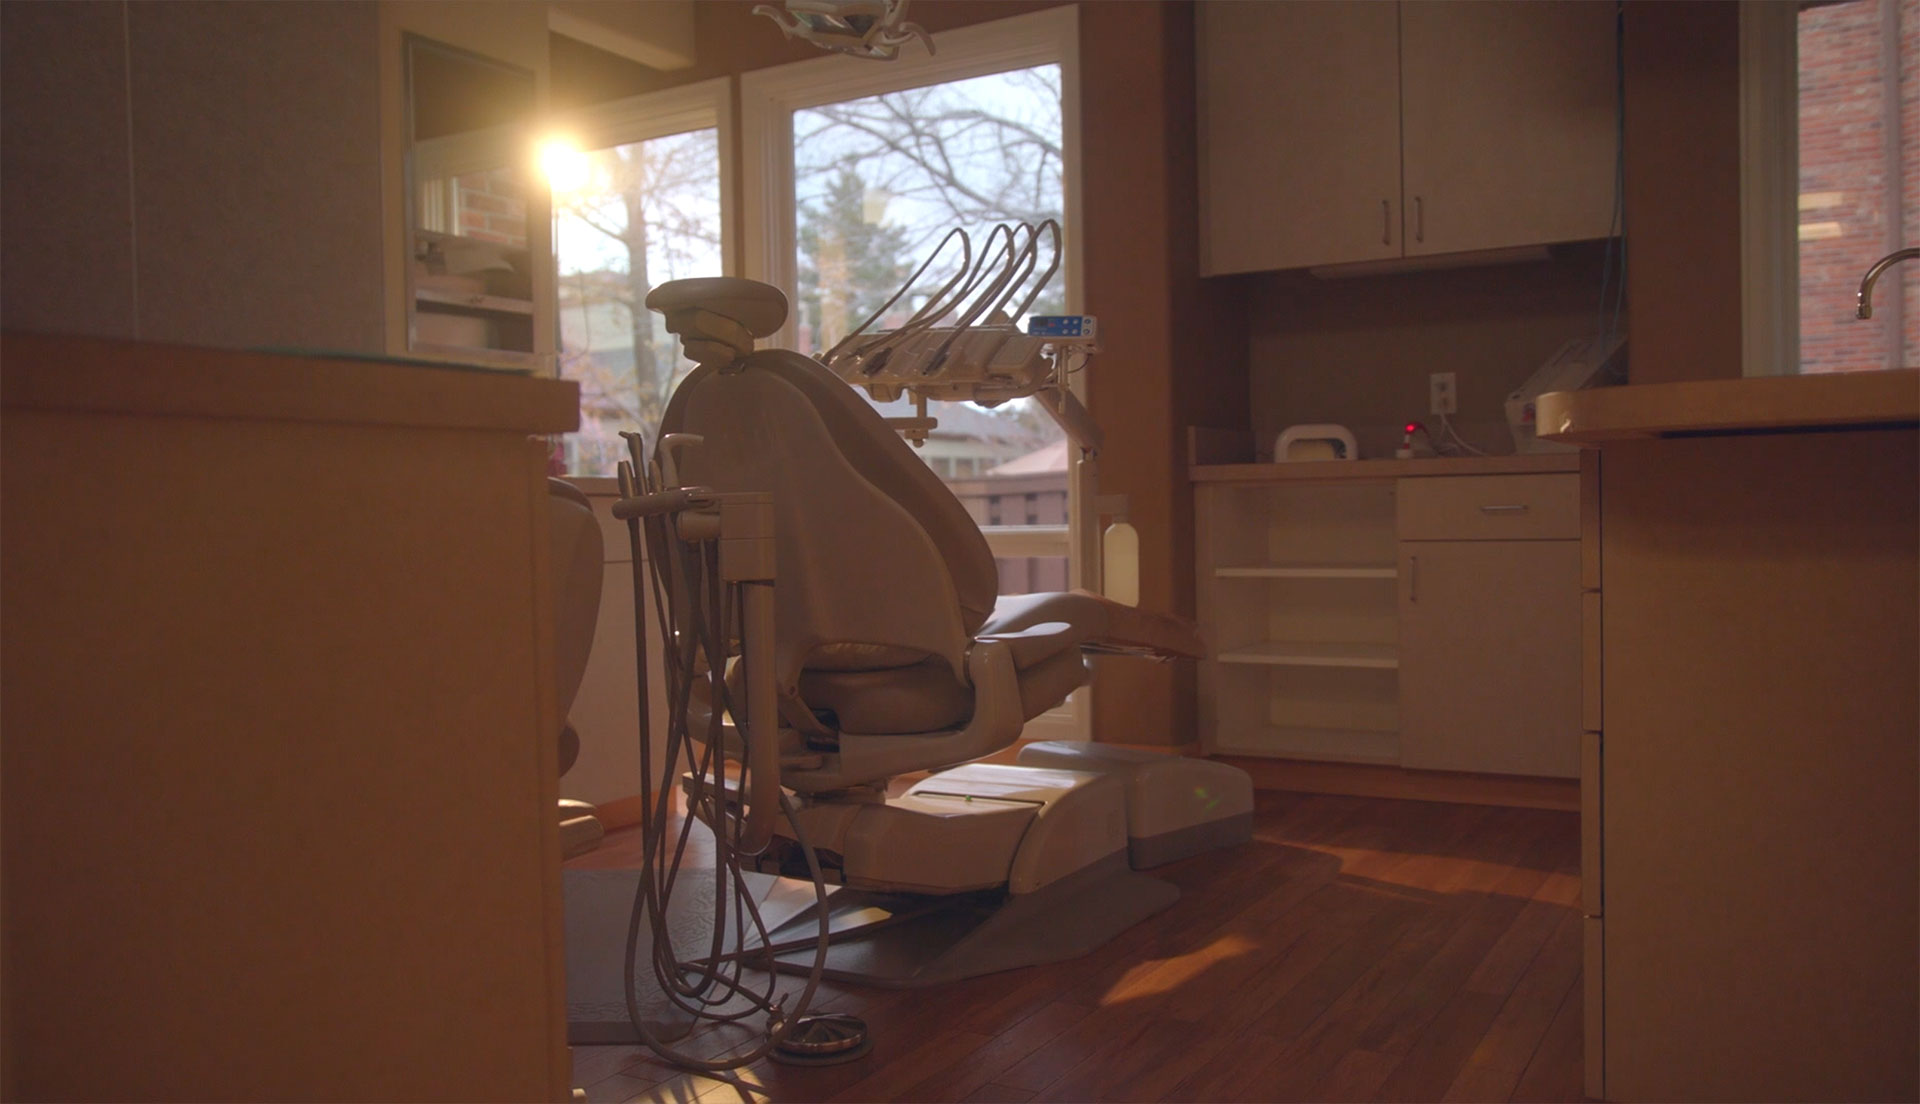 A modern dental practice with a blue and white chair, a dental treatment table, and medical equipment.